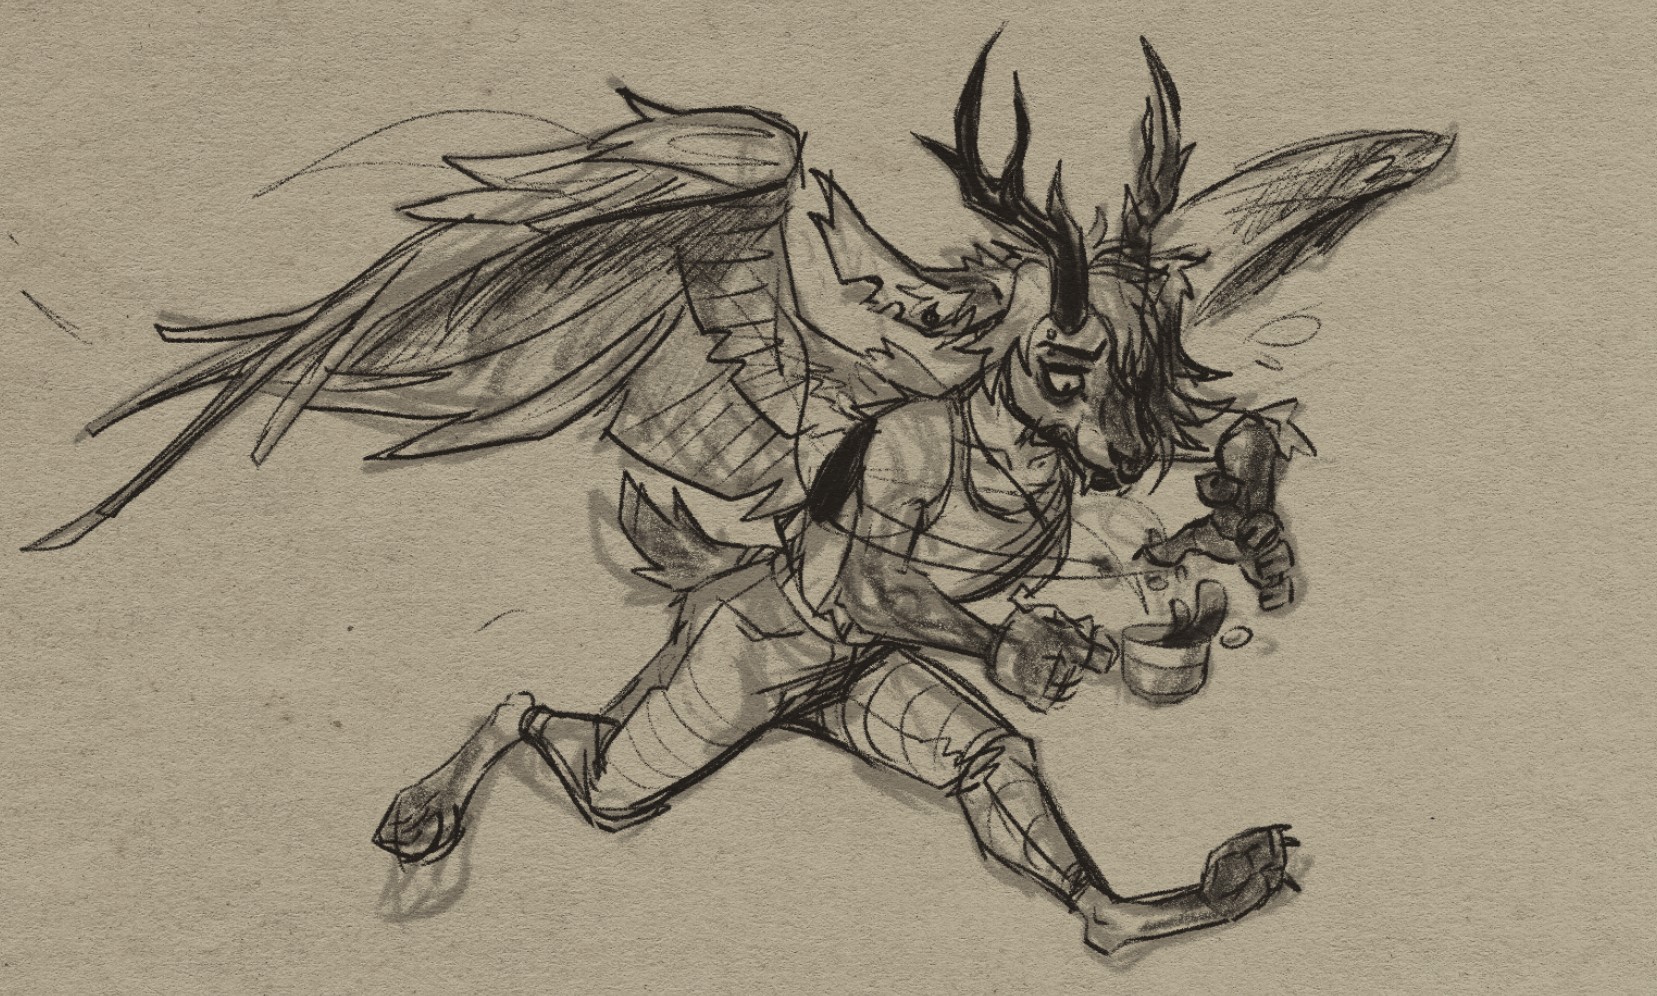 A sketch of a wolpertinger character: a rabbit-like creature with antlers, fangs, and wings. They are holding a small cup of coffee which is slashing out a bit. Their expression is one of worry over spilling the drink they are holding